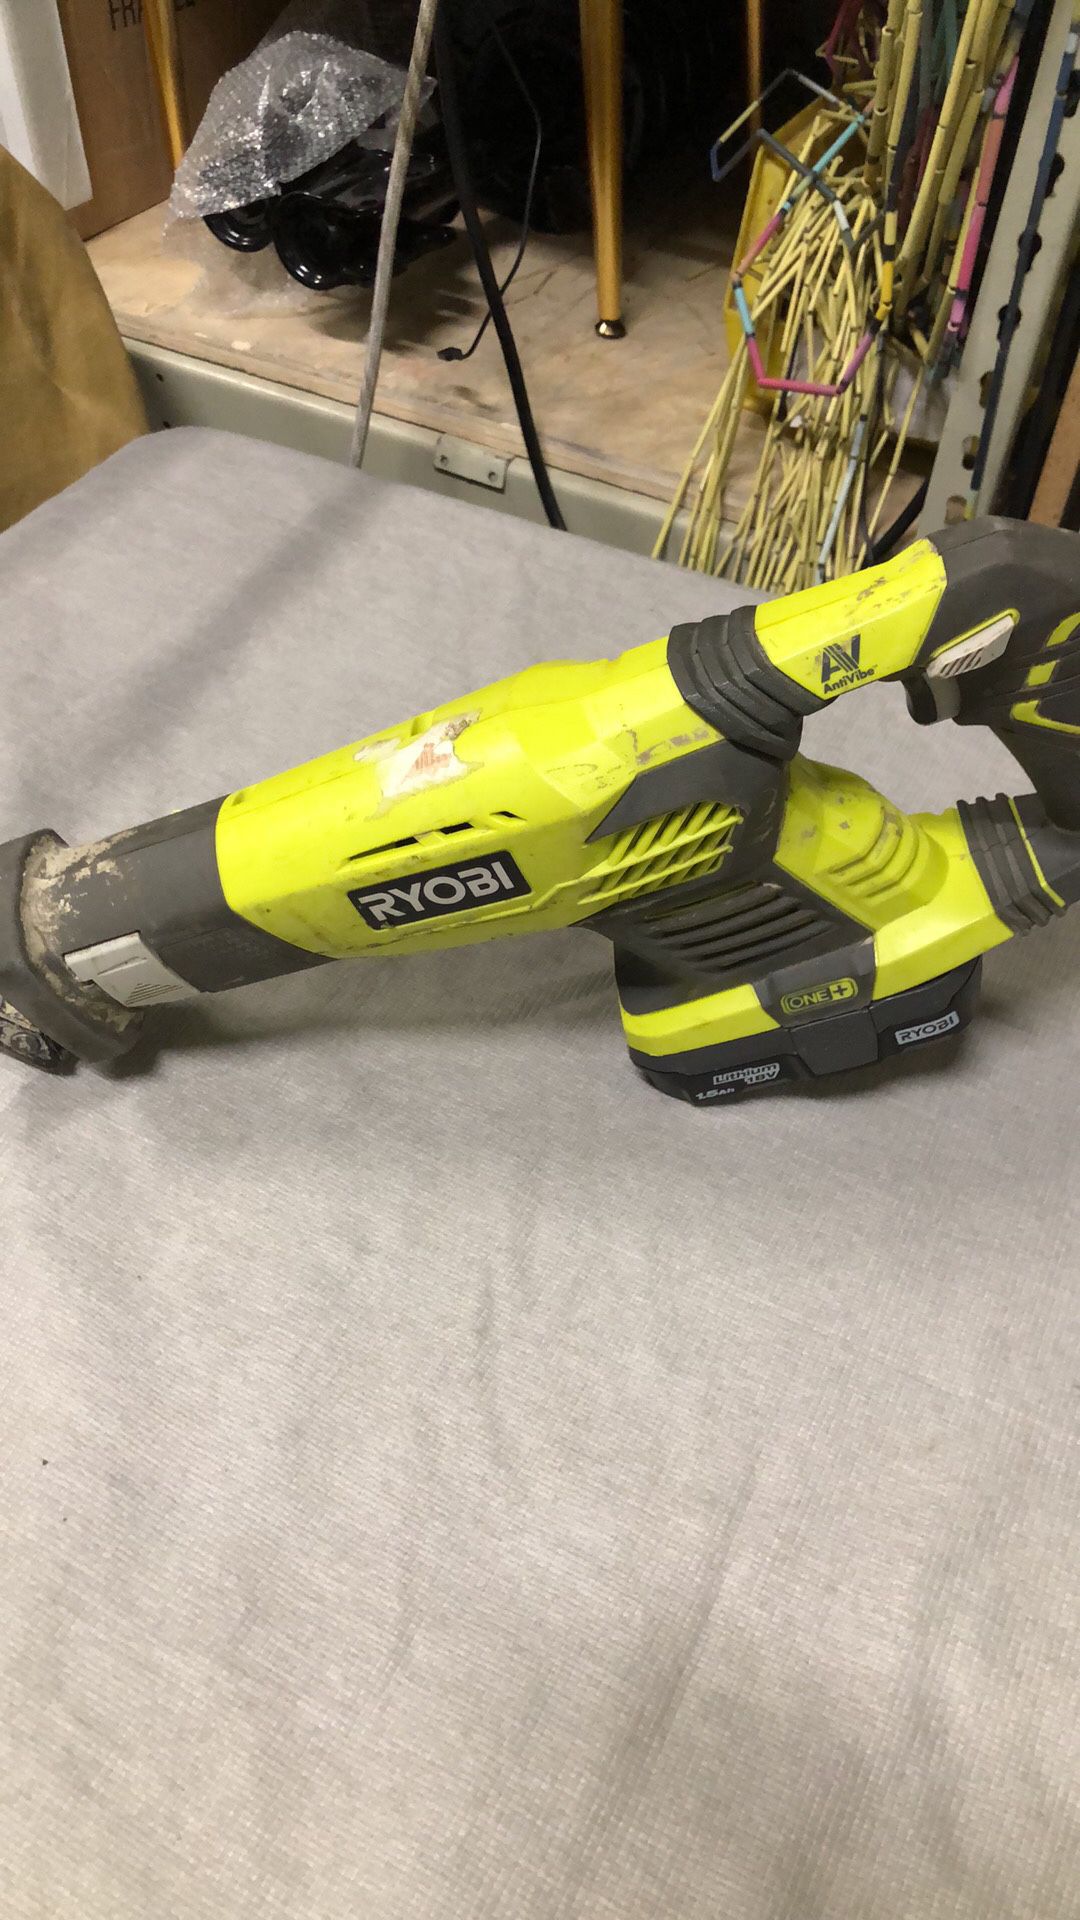 Ryobi one plus reciprocating saw with ion battery lithium